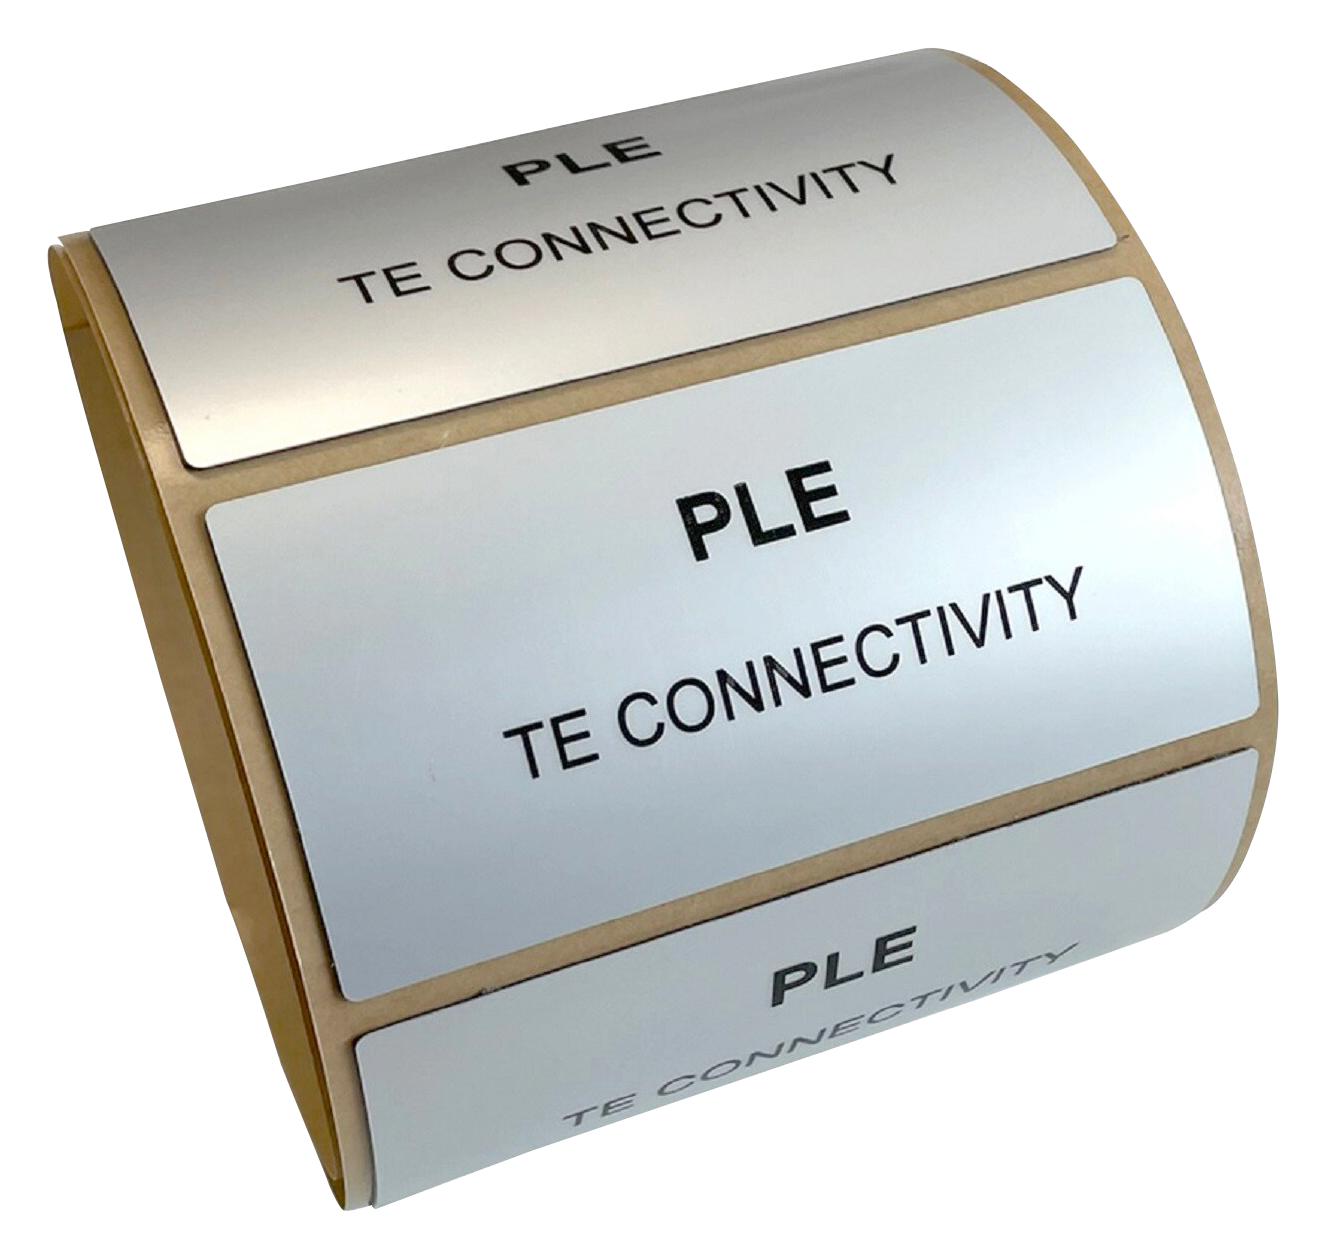 Entrelec TE Connectivity Ple-045015-Gy-0.75 Label, Polyester, Grey, 45mm X 15mm